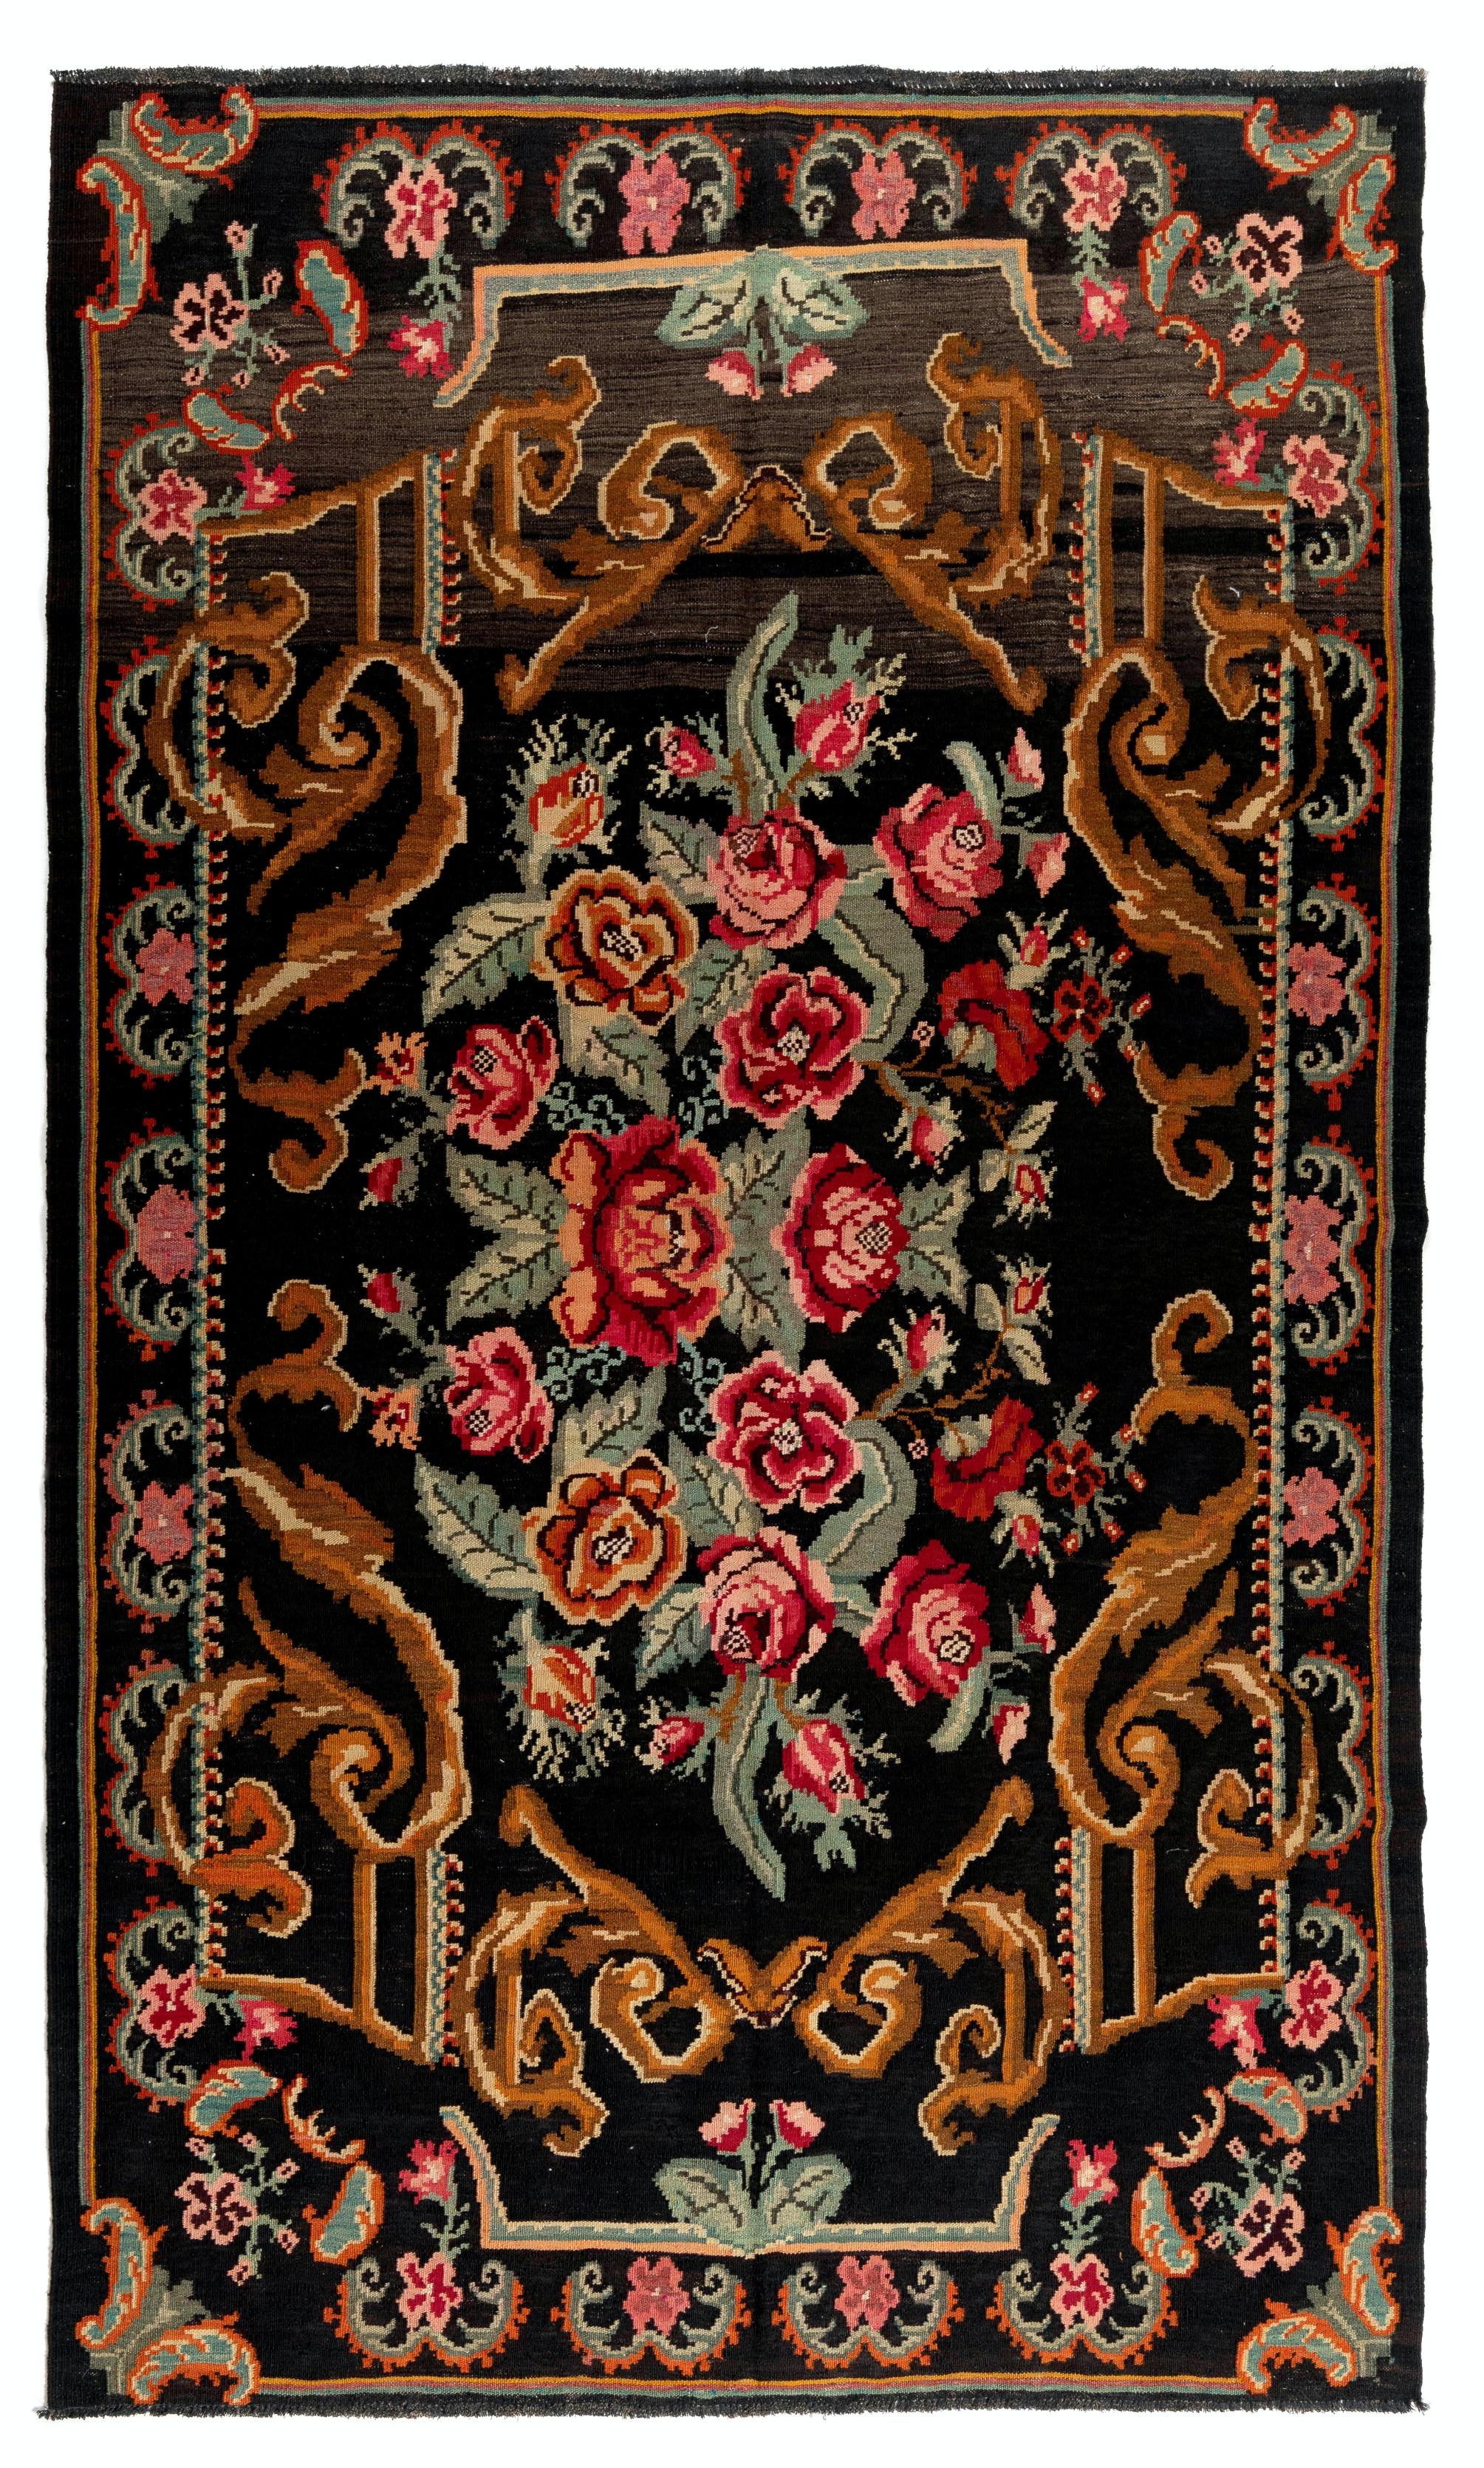 Hand-Woven 5.7x9.4 Ft Vintage Bessarabian Kilim, Handwoven Rug. Floral Tapestry. 100% Wool For Sale